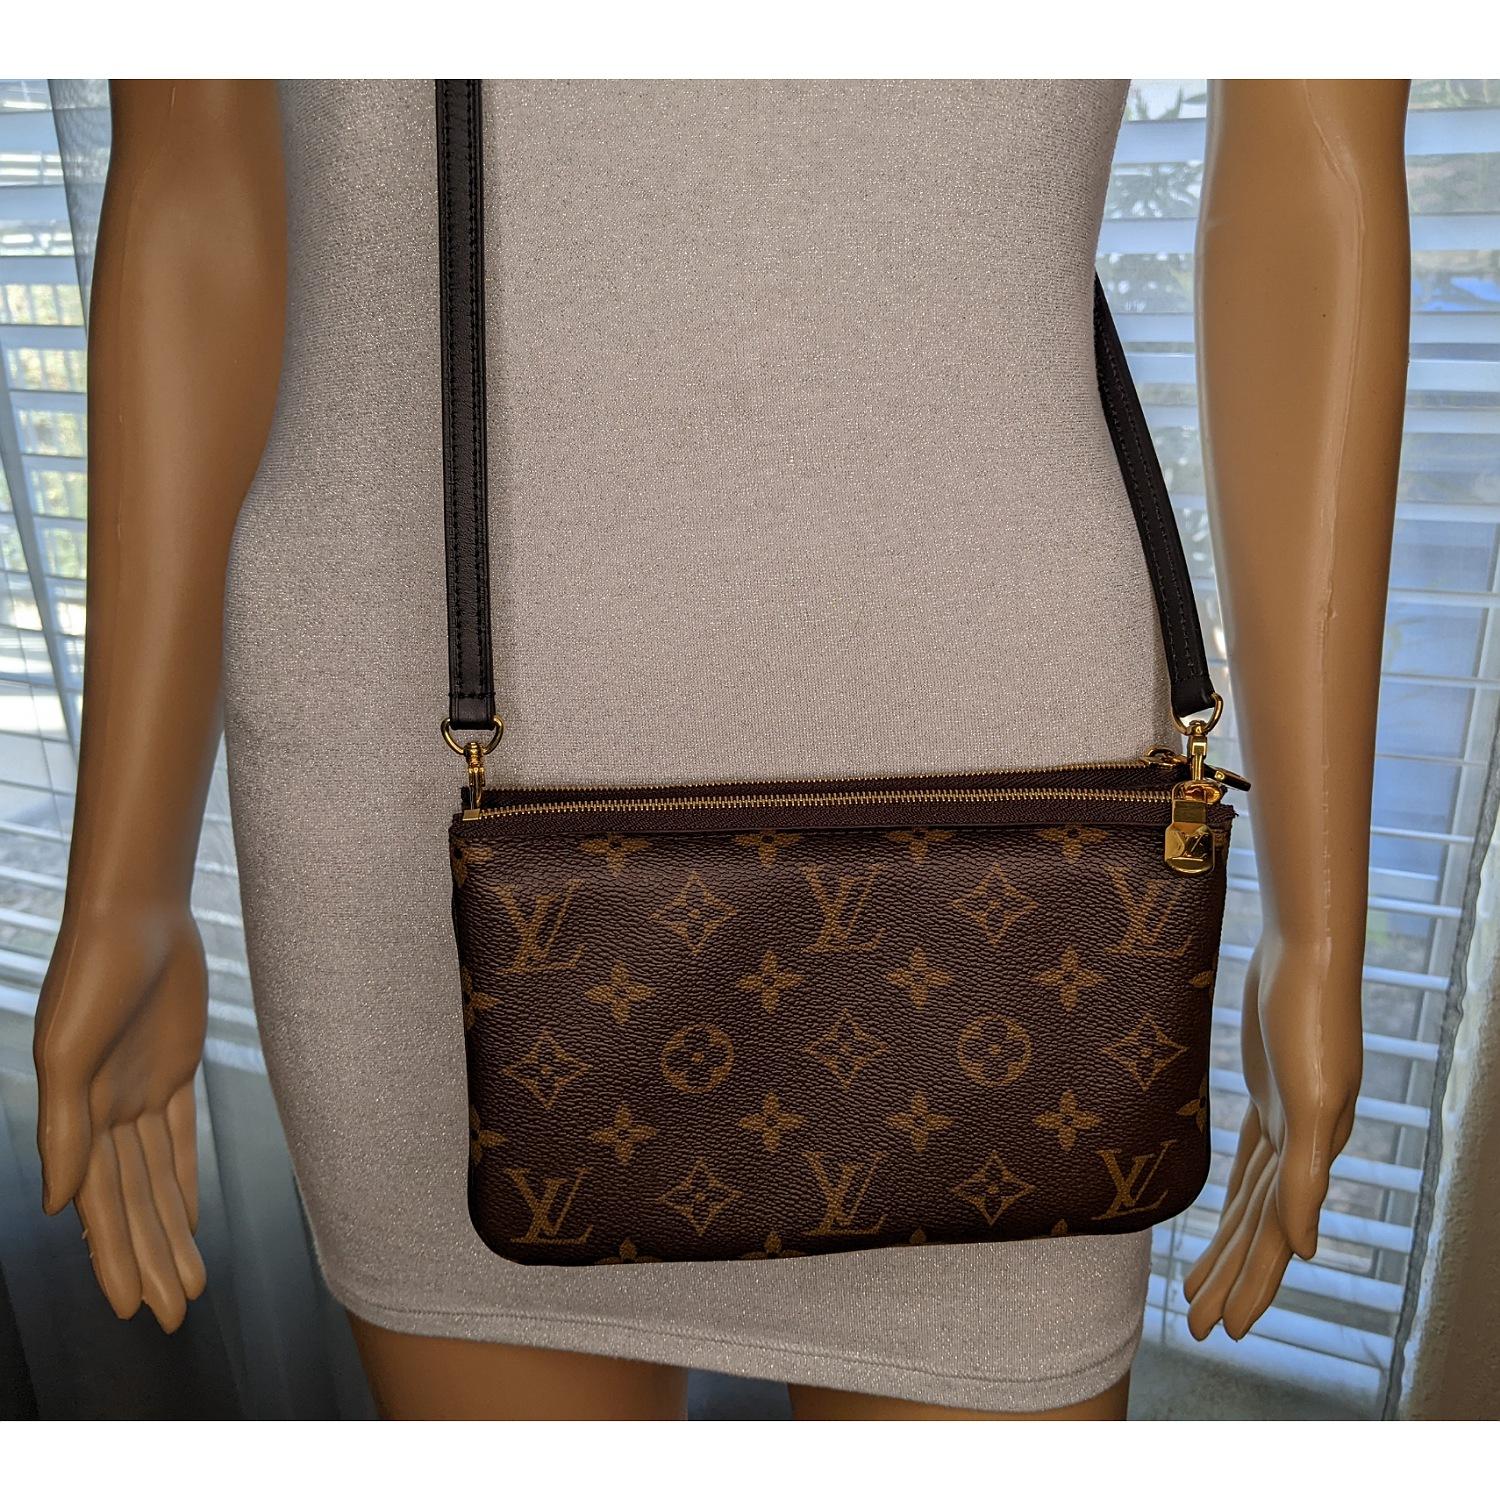 This stylish pochette is crafted of traditional Louis Vuitton monogram on toile canvas with a giant reverse monogram canvas on the opposite side. This shoulder bag features black leather trim, a black adjustable leather shoulder strap, and two top